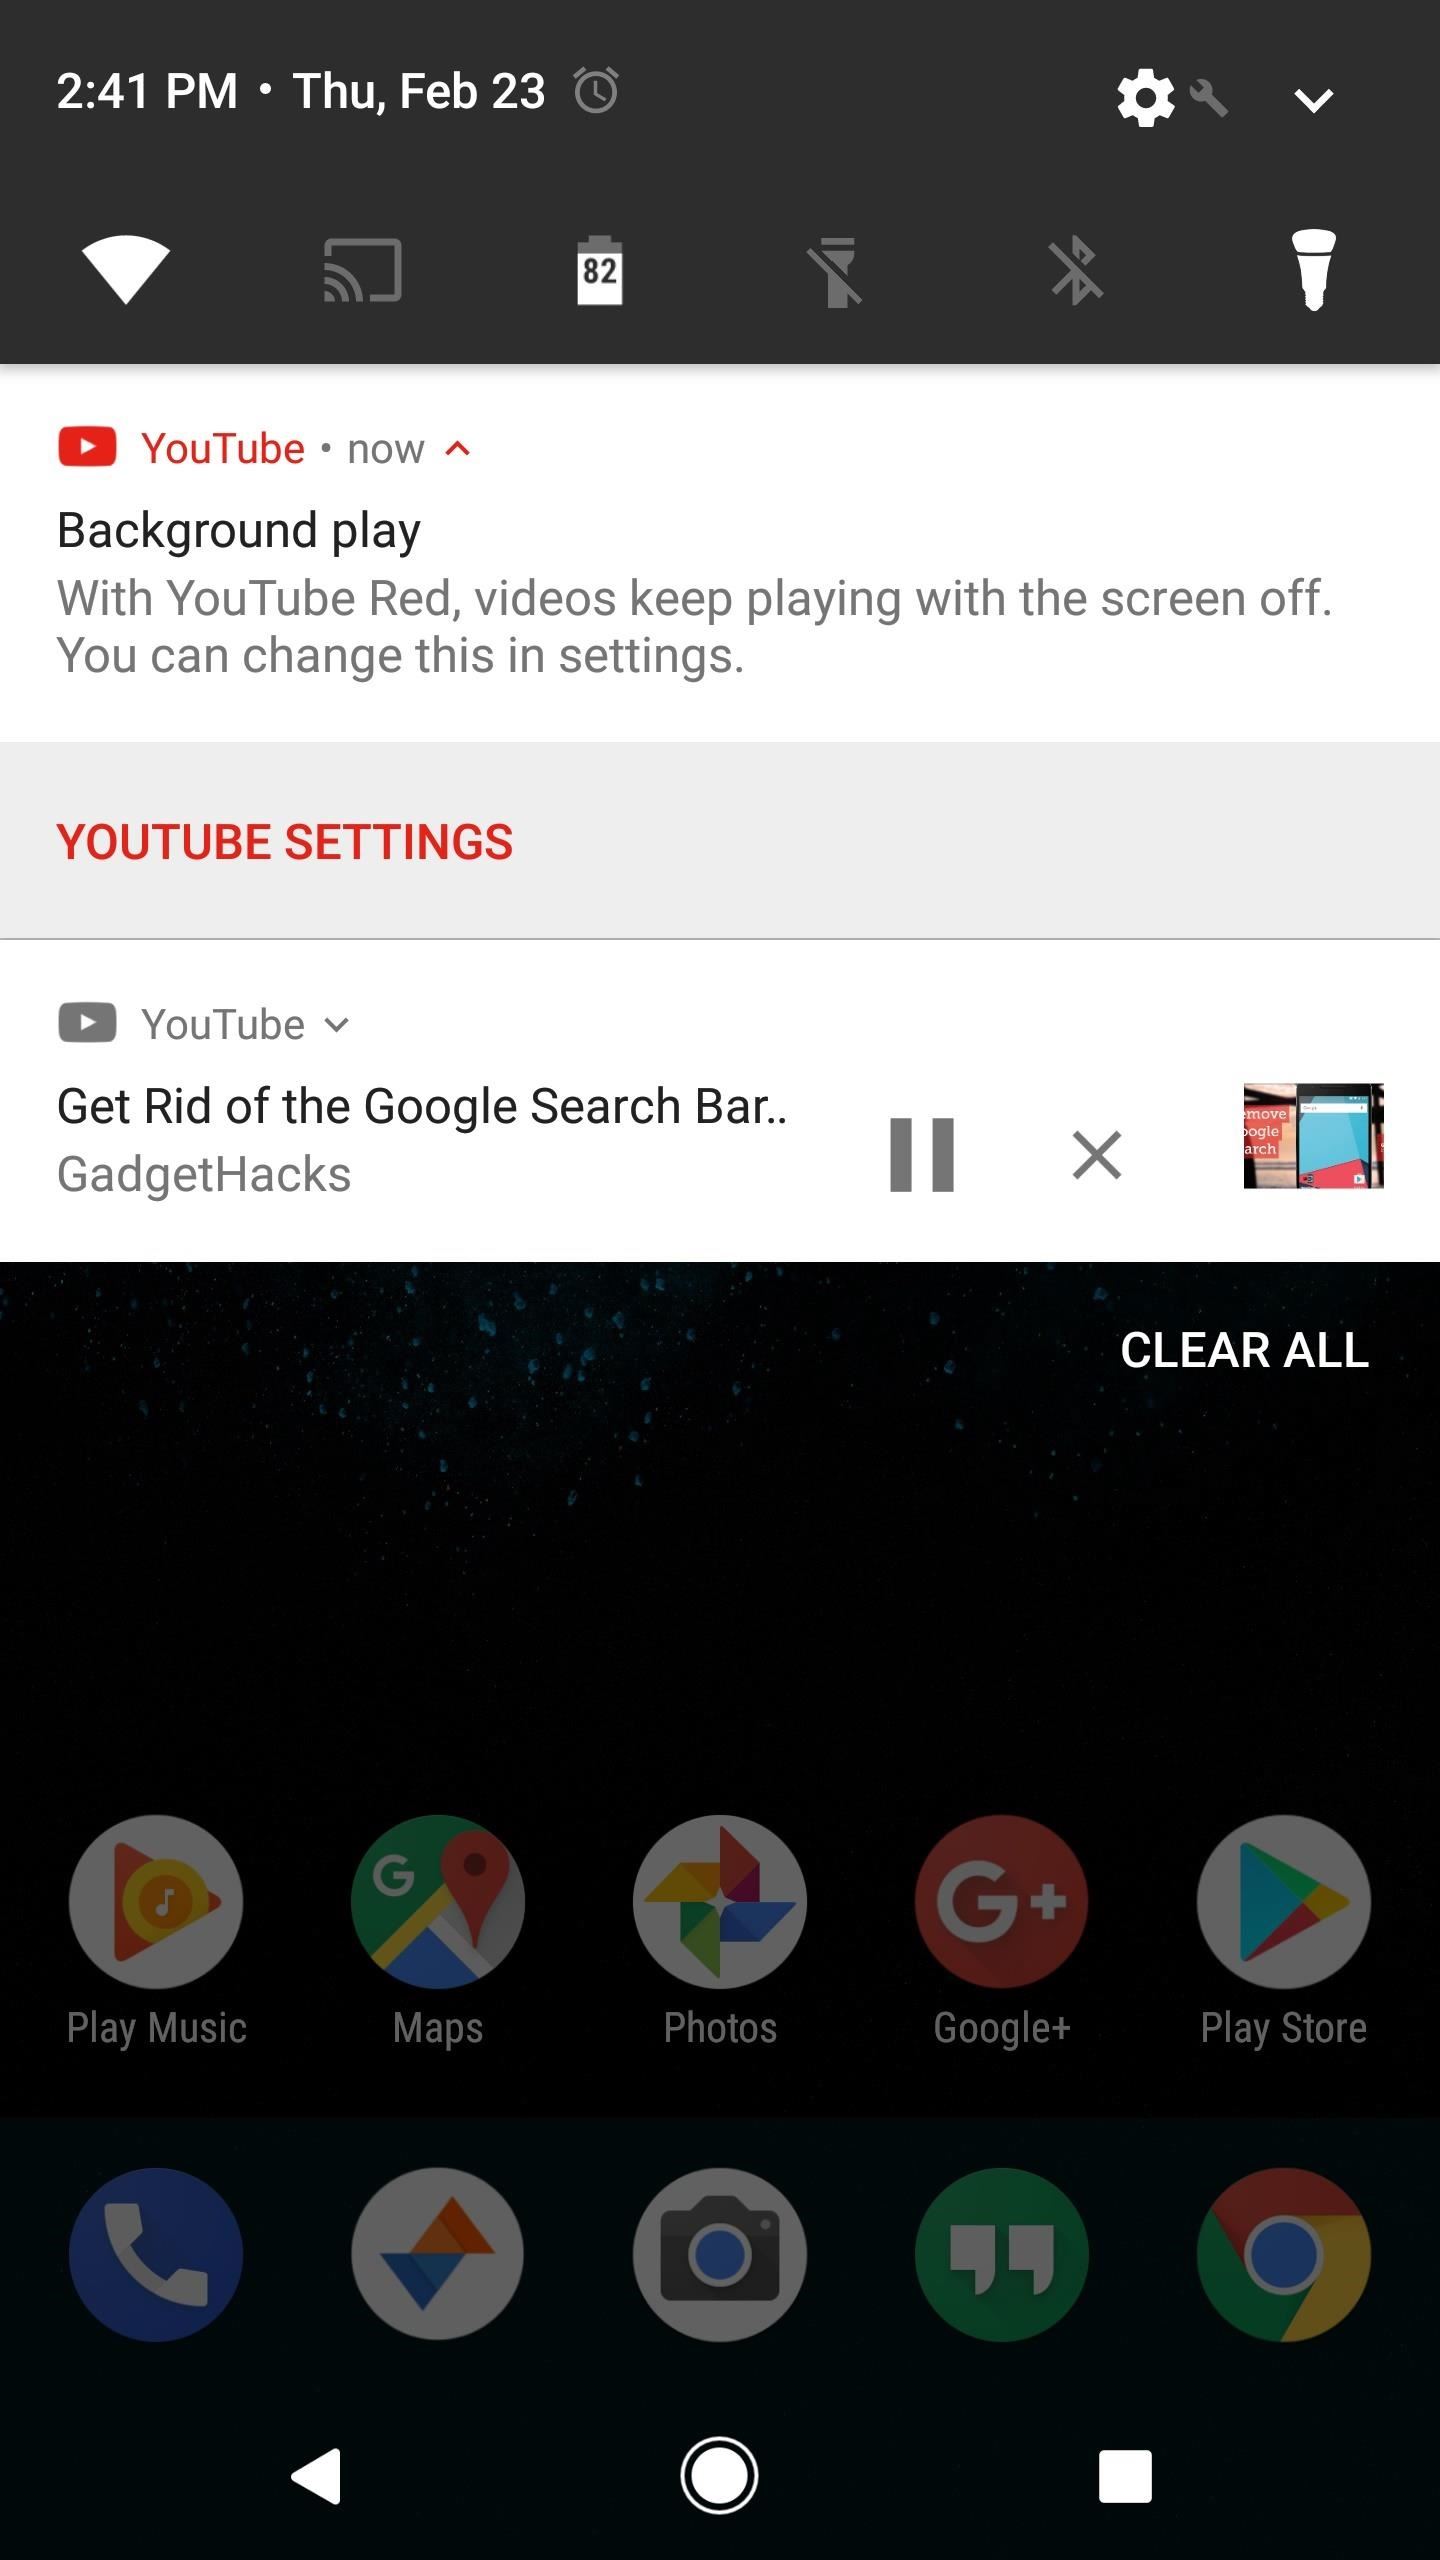 This Modded Version of YouTube Lets You Play Videos in the Background with the Screen Off